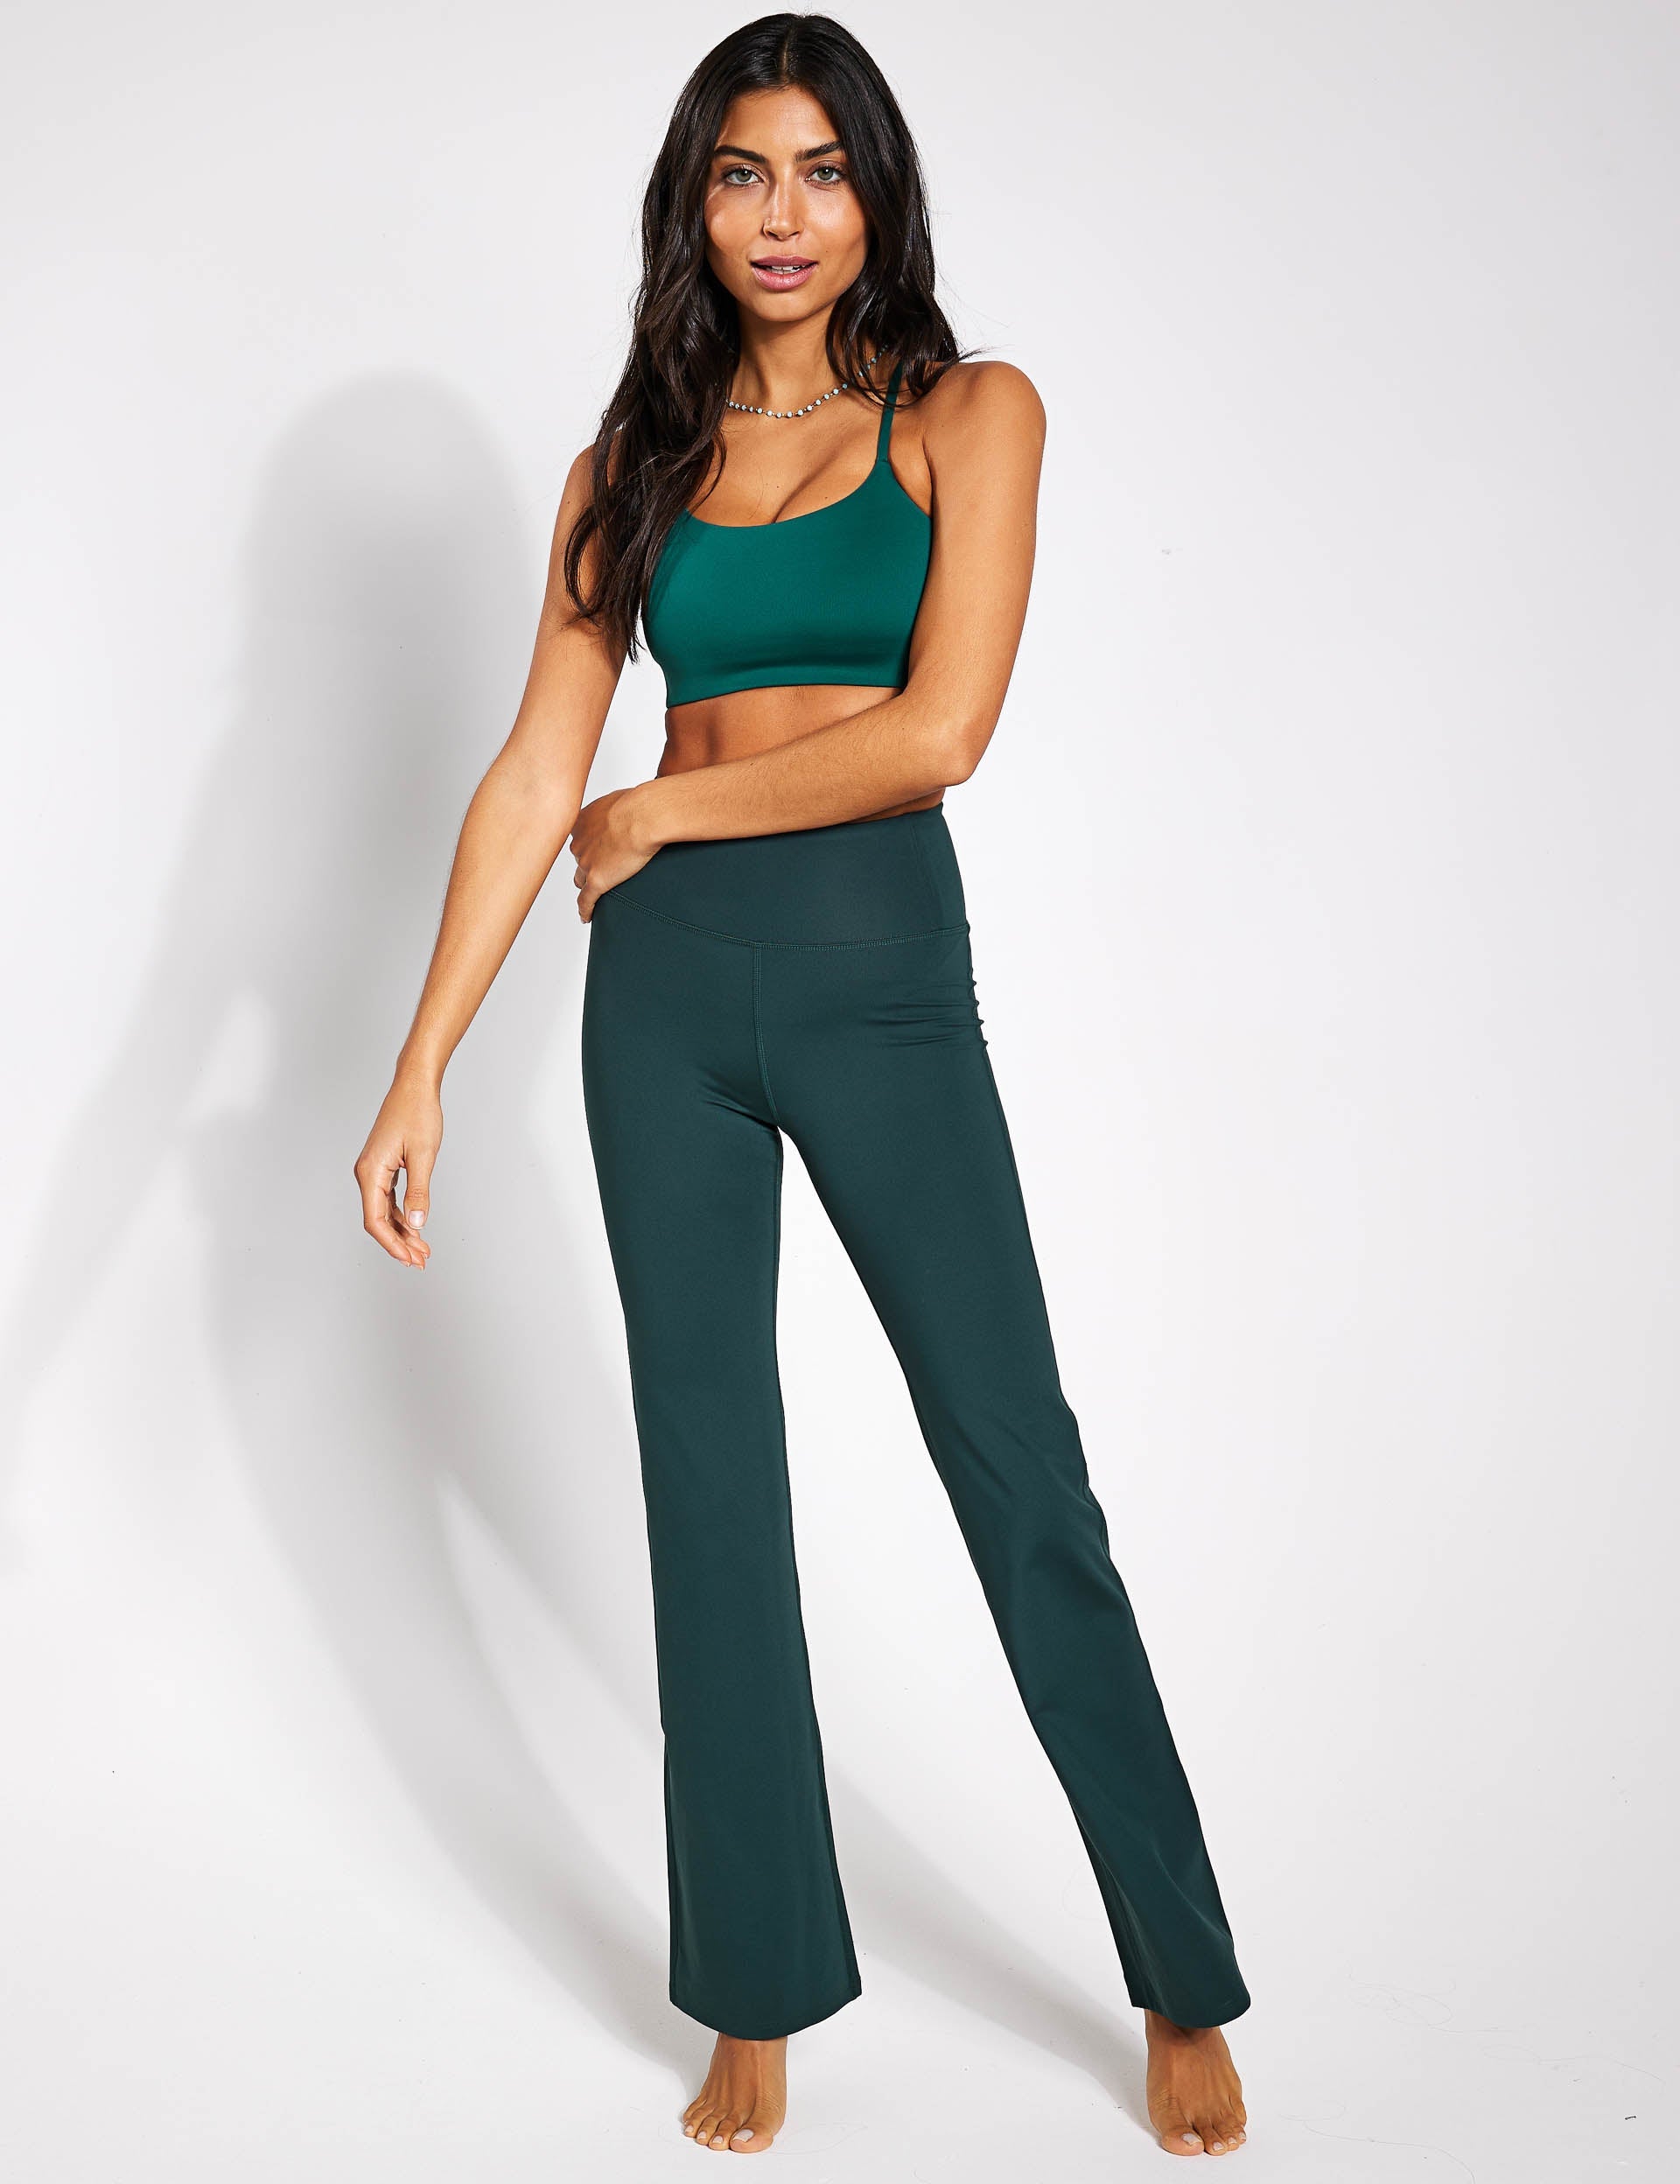 Girlfriend Collective, Flare Legging - Moss